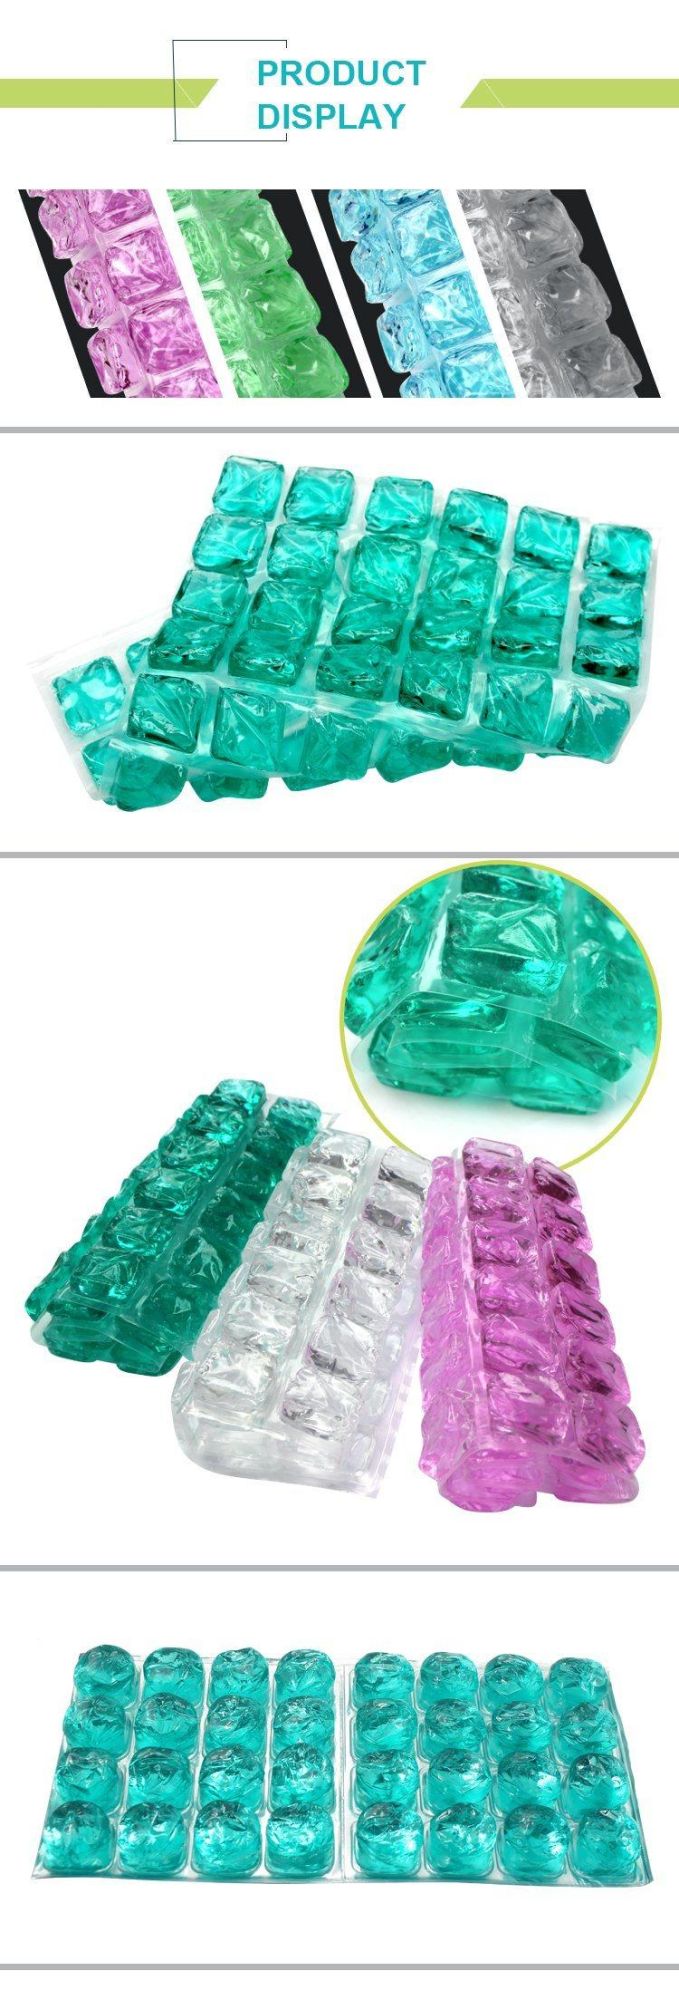 Good Quality Multi-Color Gel Ice Cool Mat Summer Hot Weather Use